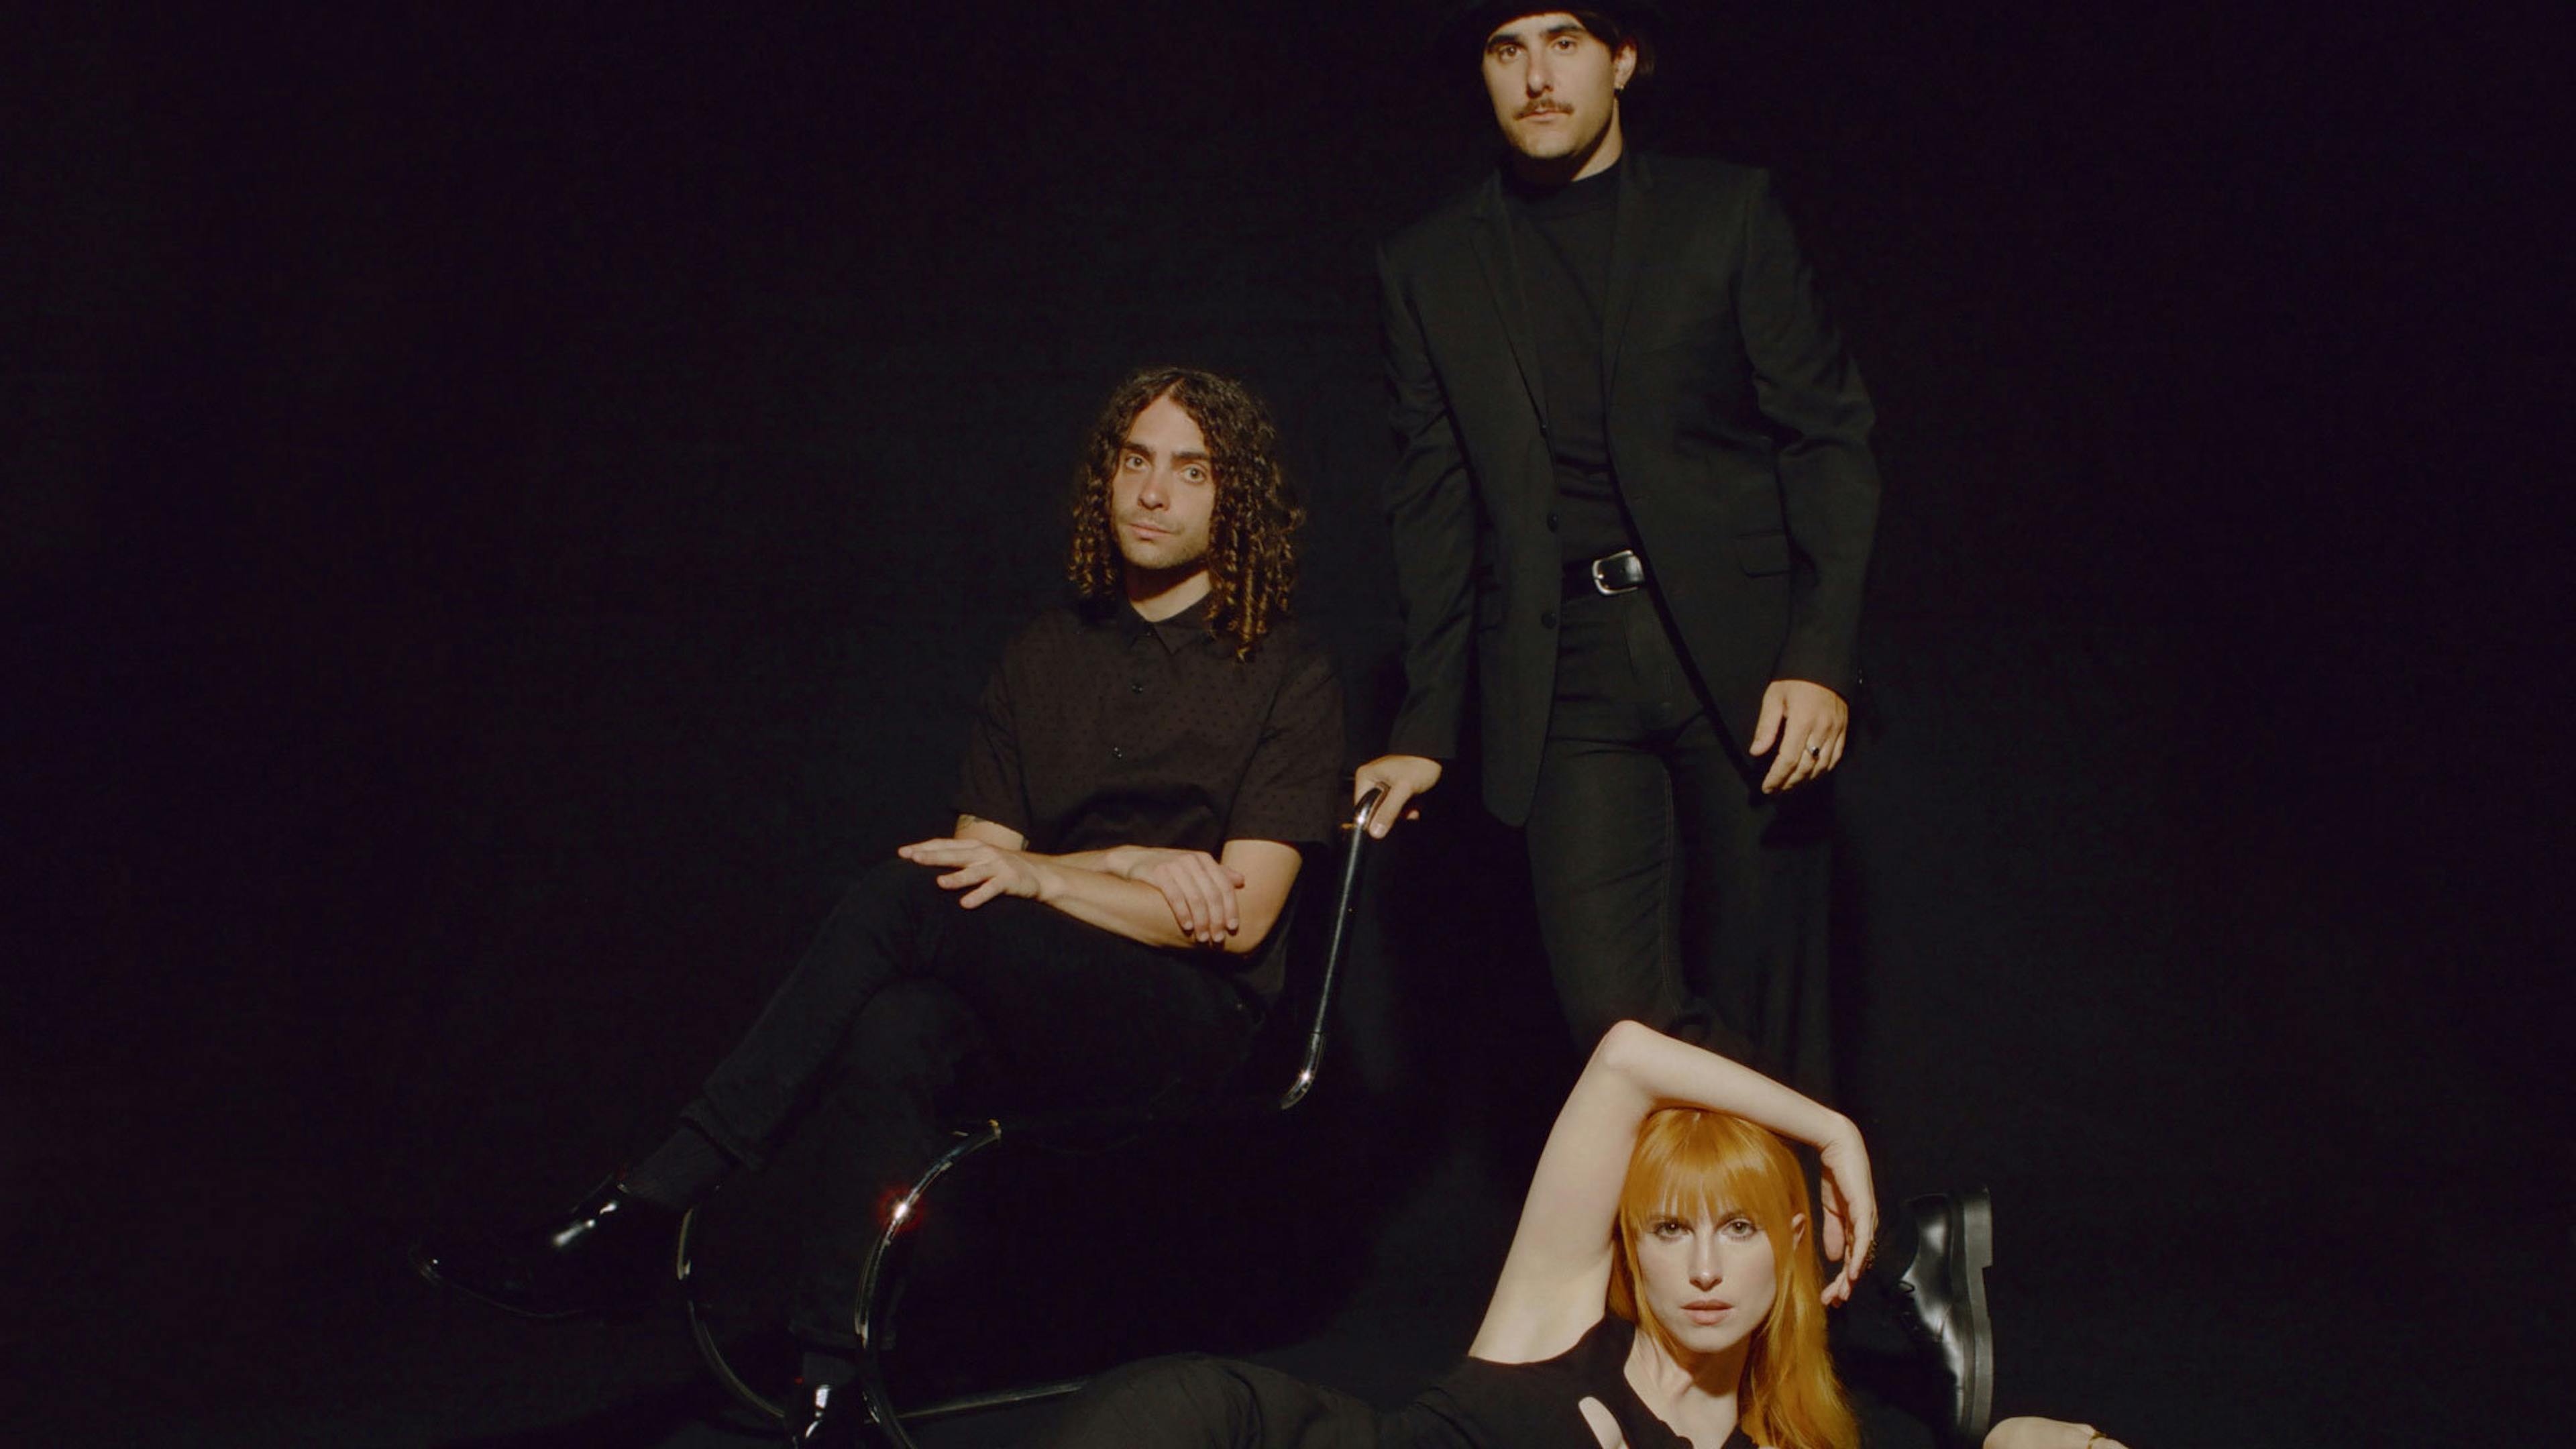 Paramore tribute song lyrics (first verse and chorus). Click on